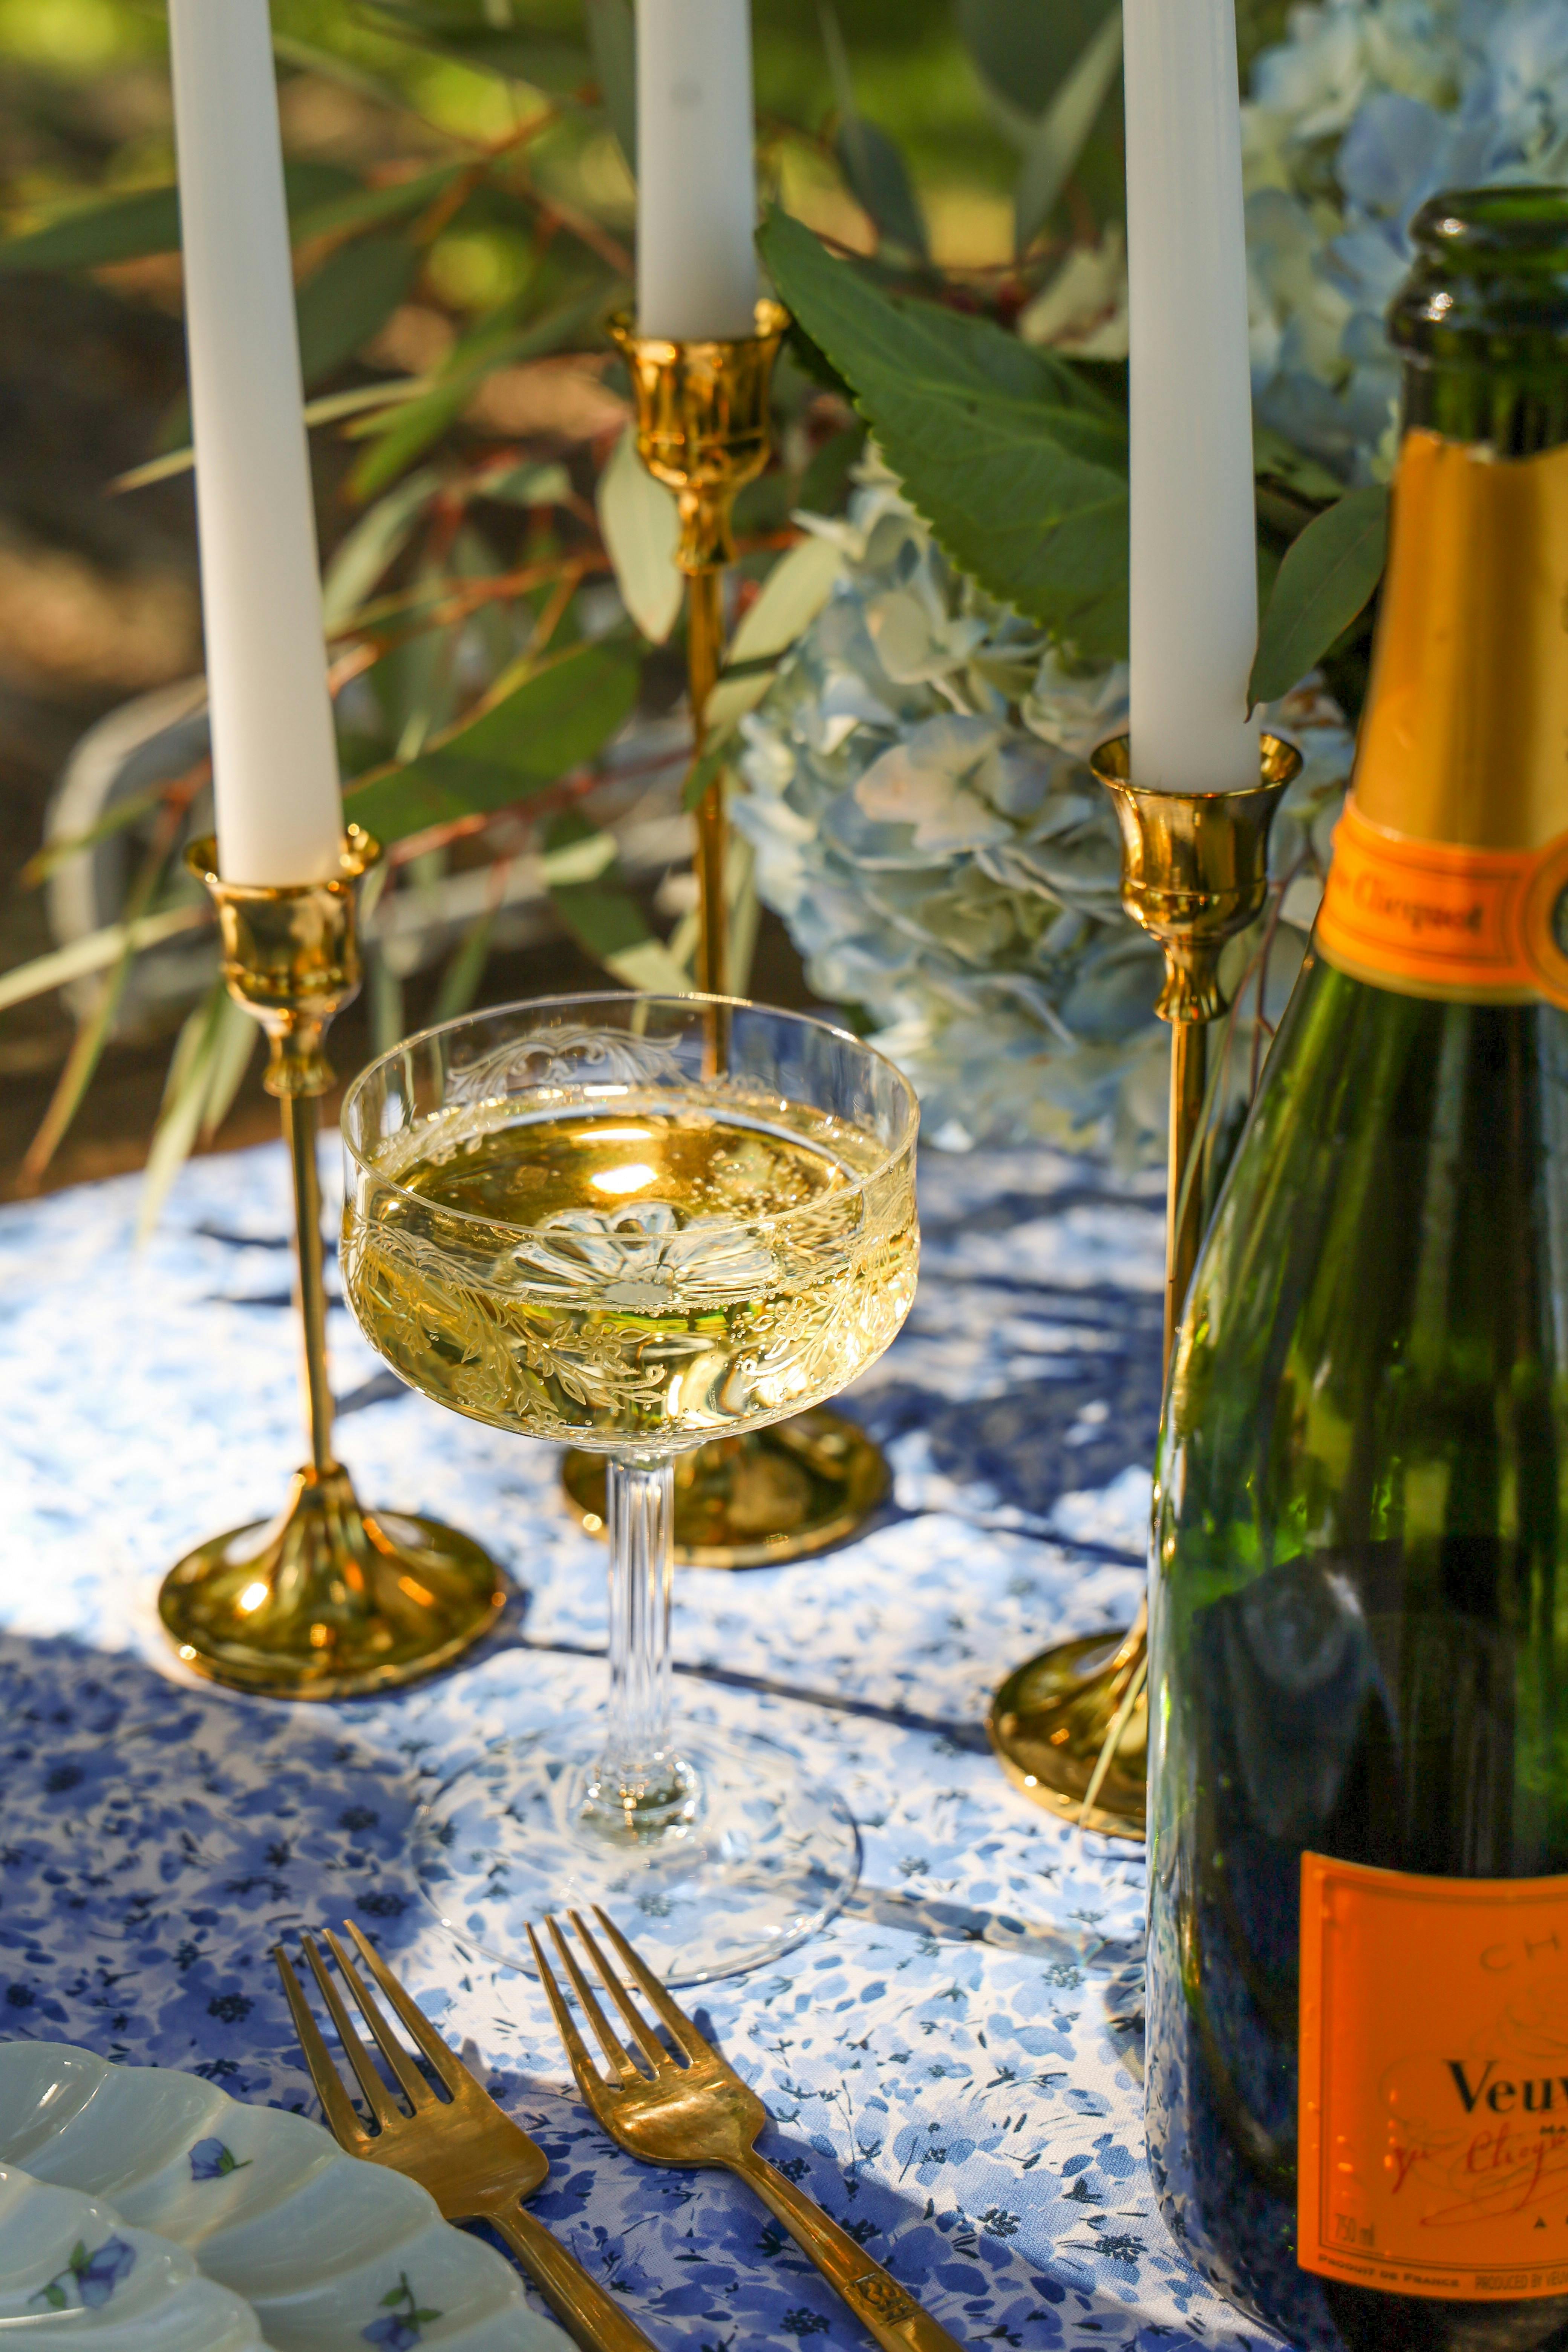 Elegant outdoor dining setup with a champagne glass and bottle, gold candlesticks with white candles, and gold cutlery on a blue floral tablecloth.